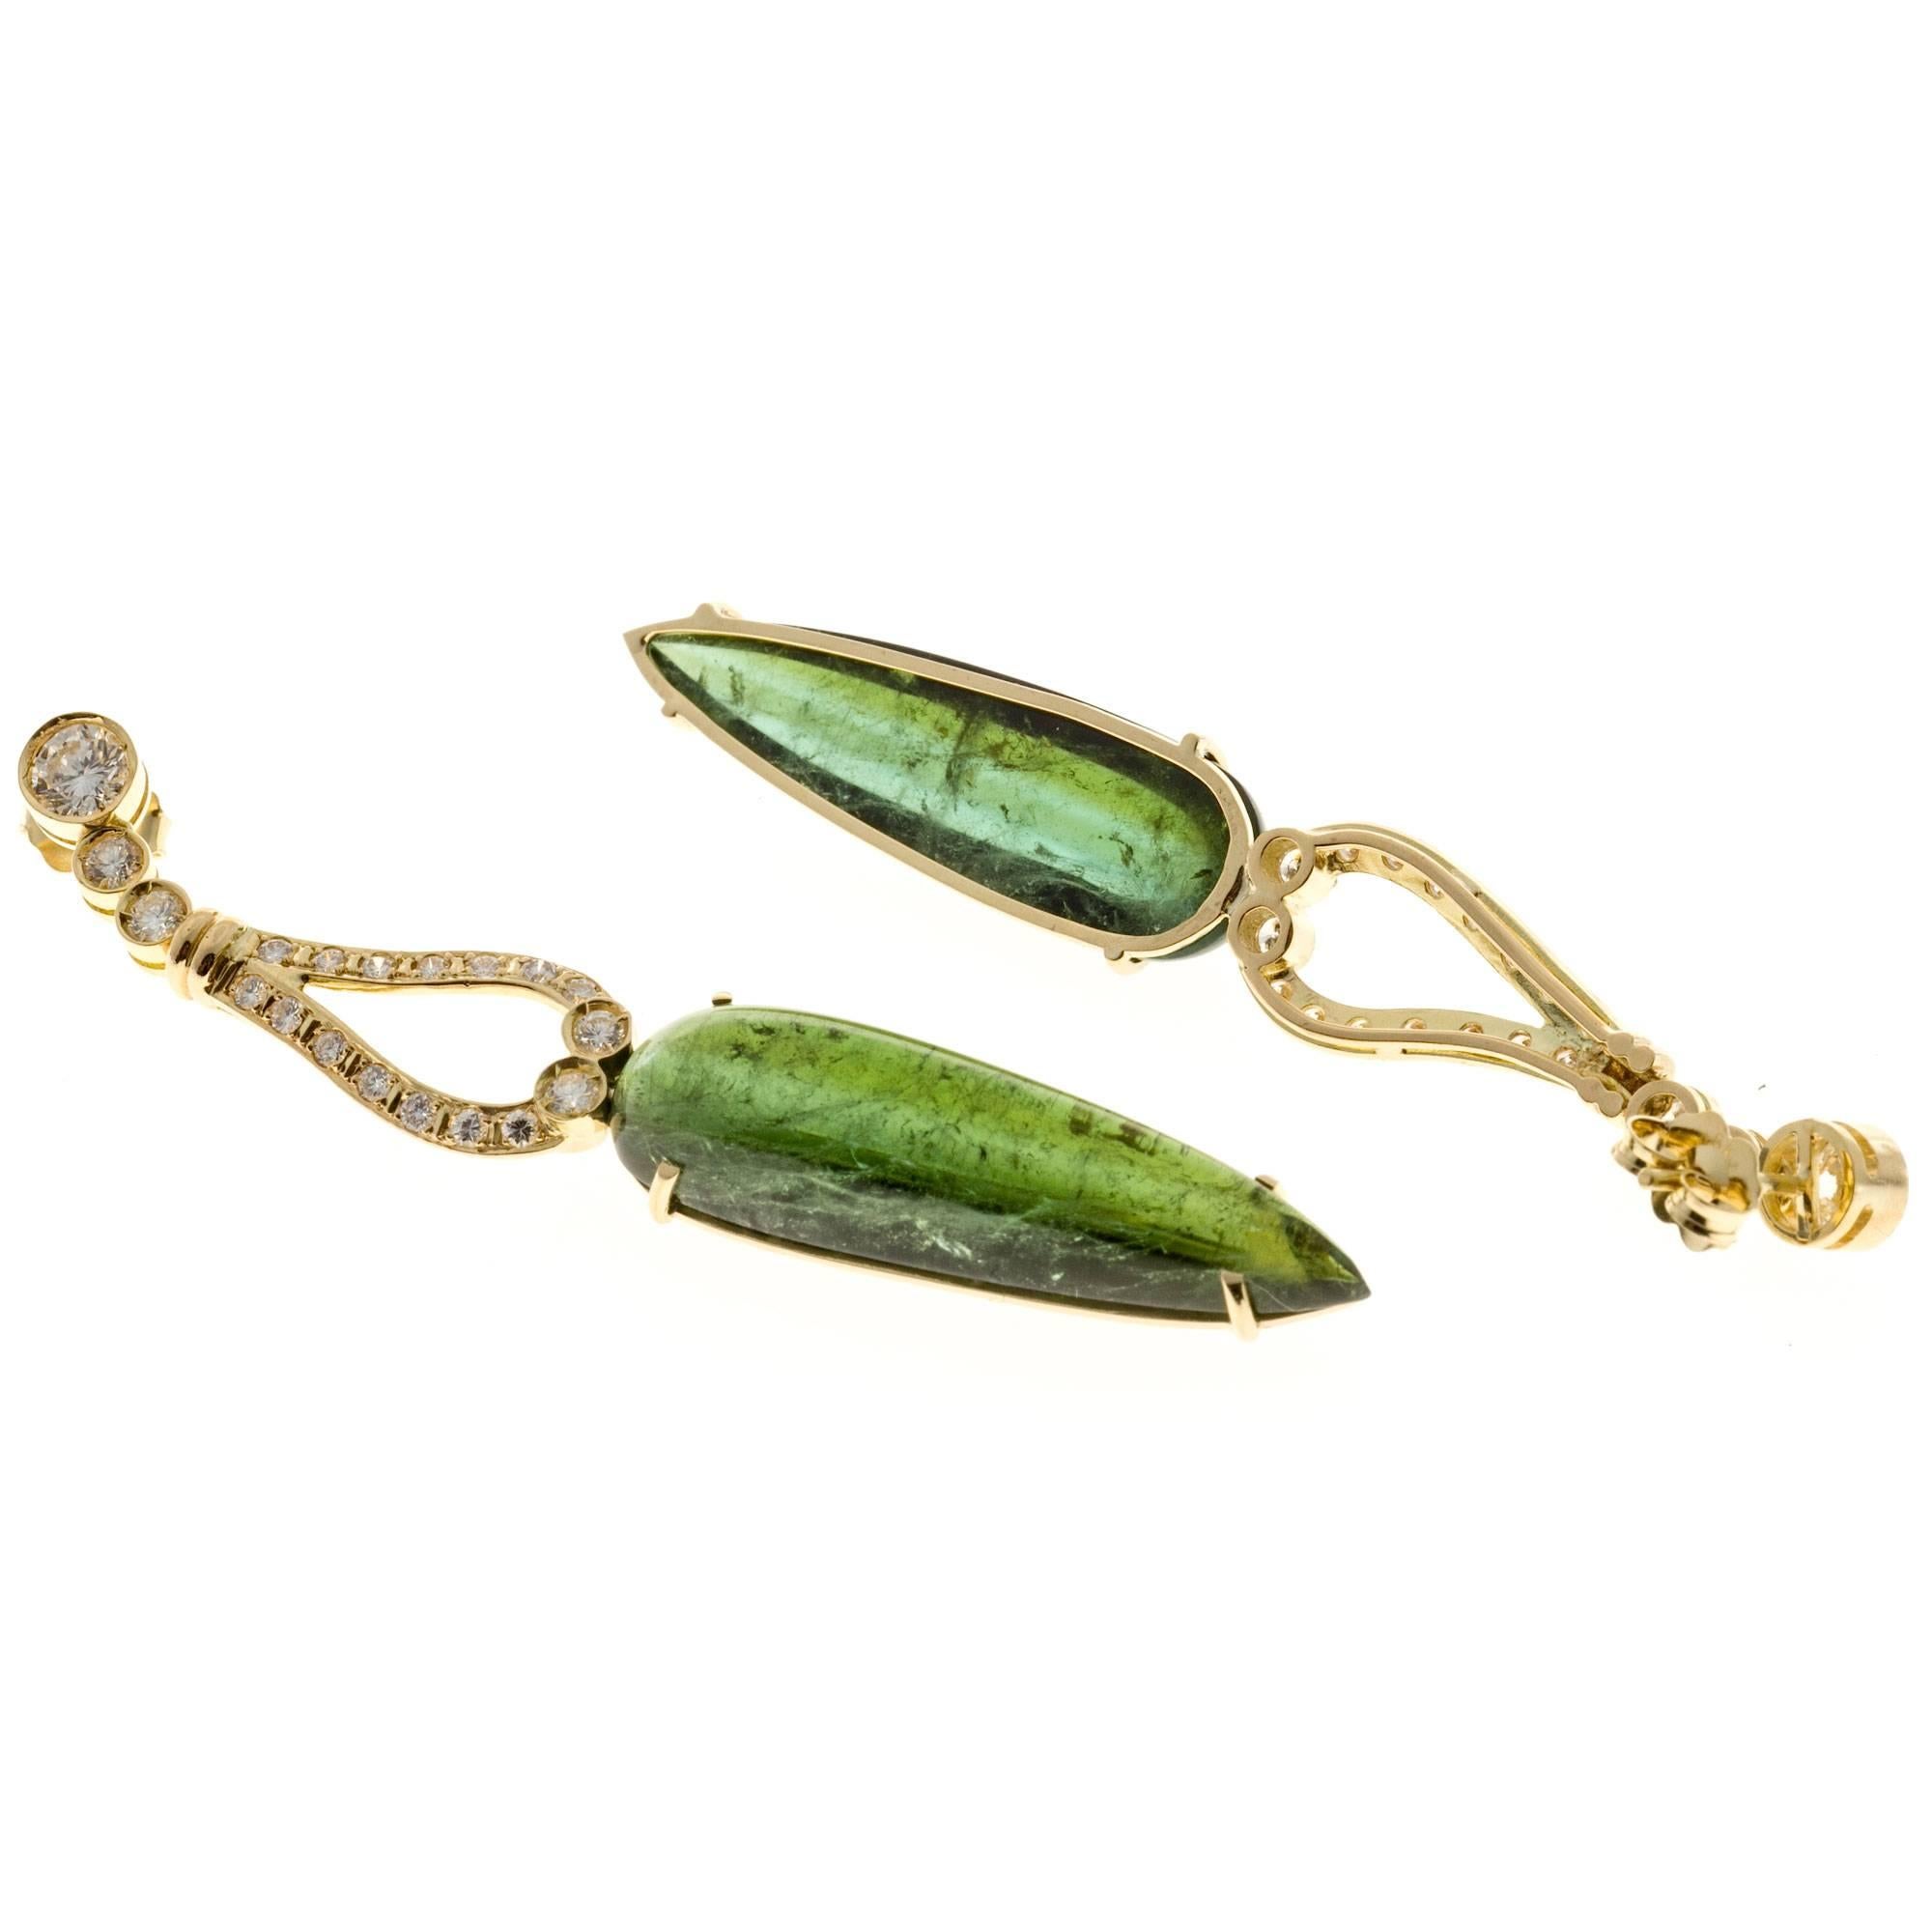 Vintage 1960 cabochon Tourmaline dangle earrings in 18k yellow gold with bright sparkly diamonds.  2.5 inches long.

2 cabochon green pear shaped natural Tourmaline, approx. total weight 32.65cts, moderate inclusions
2 round diamonds, approx.